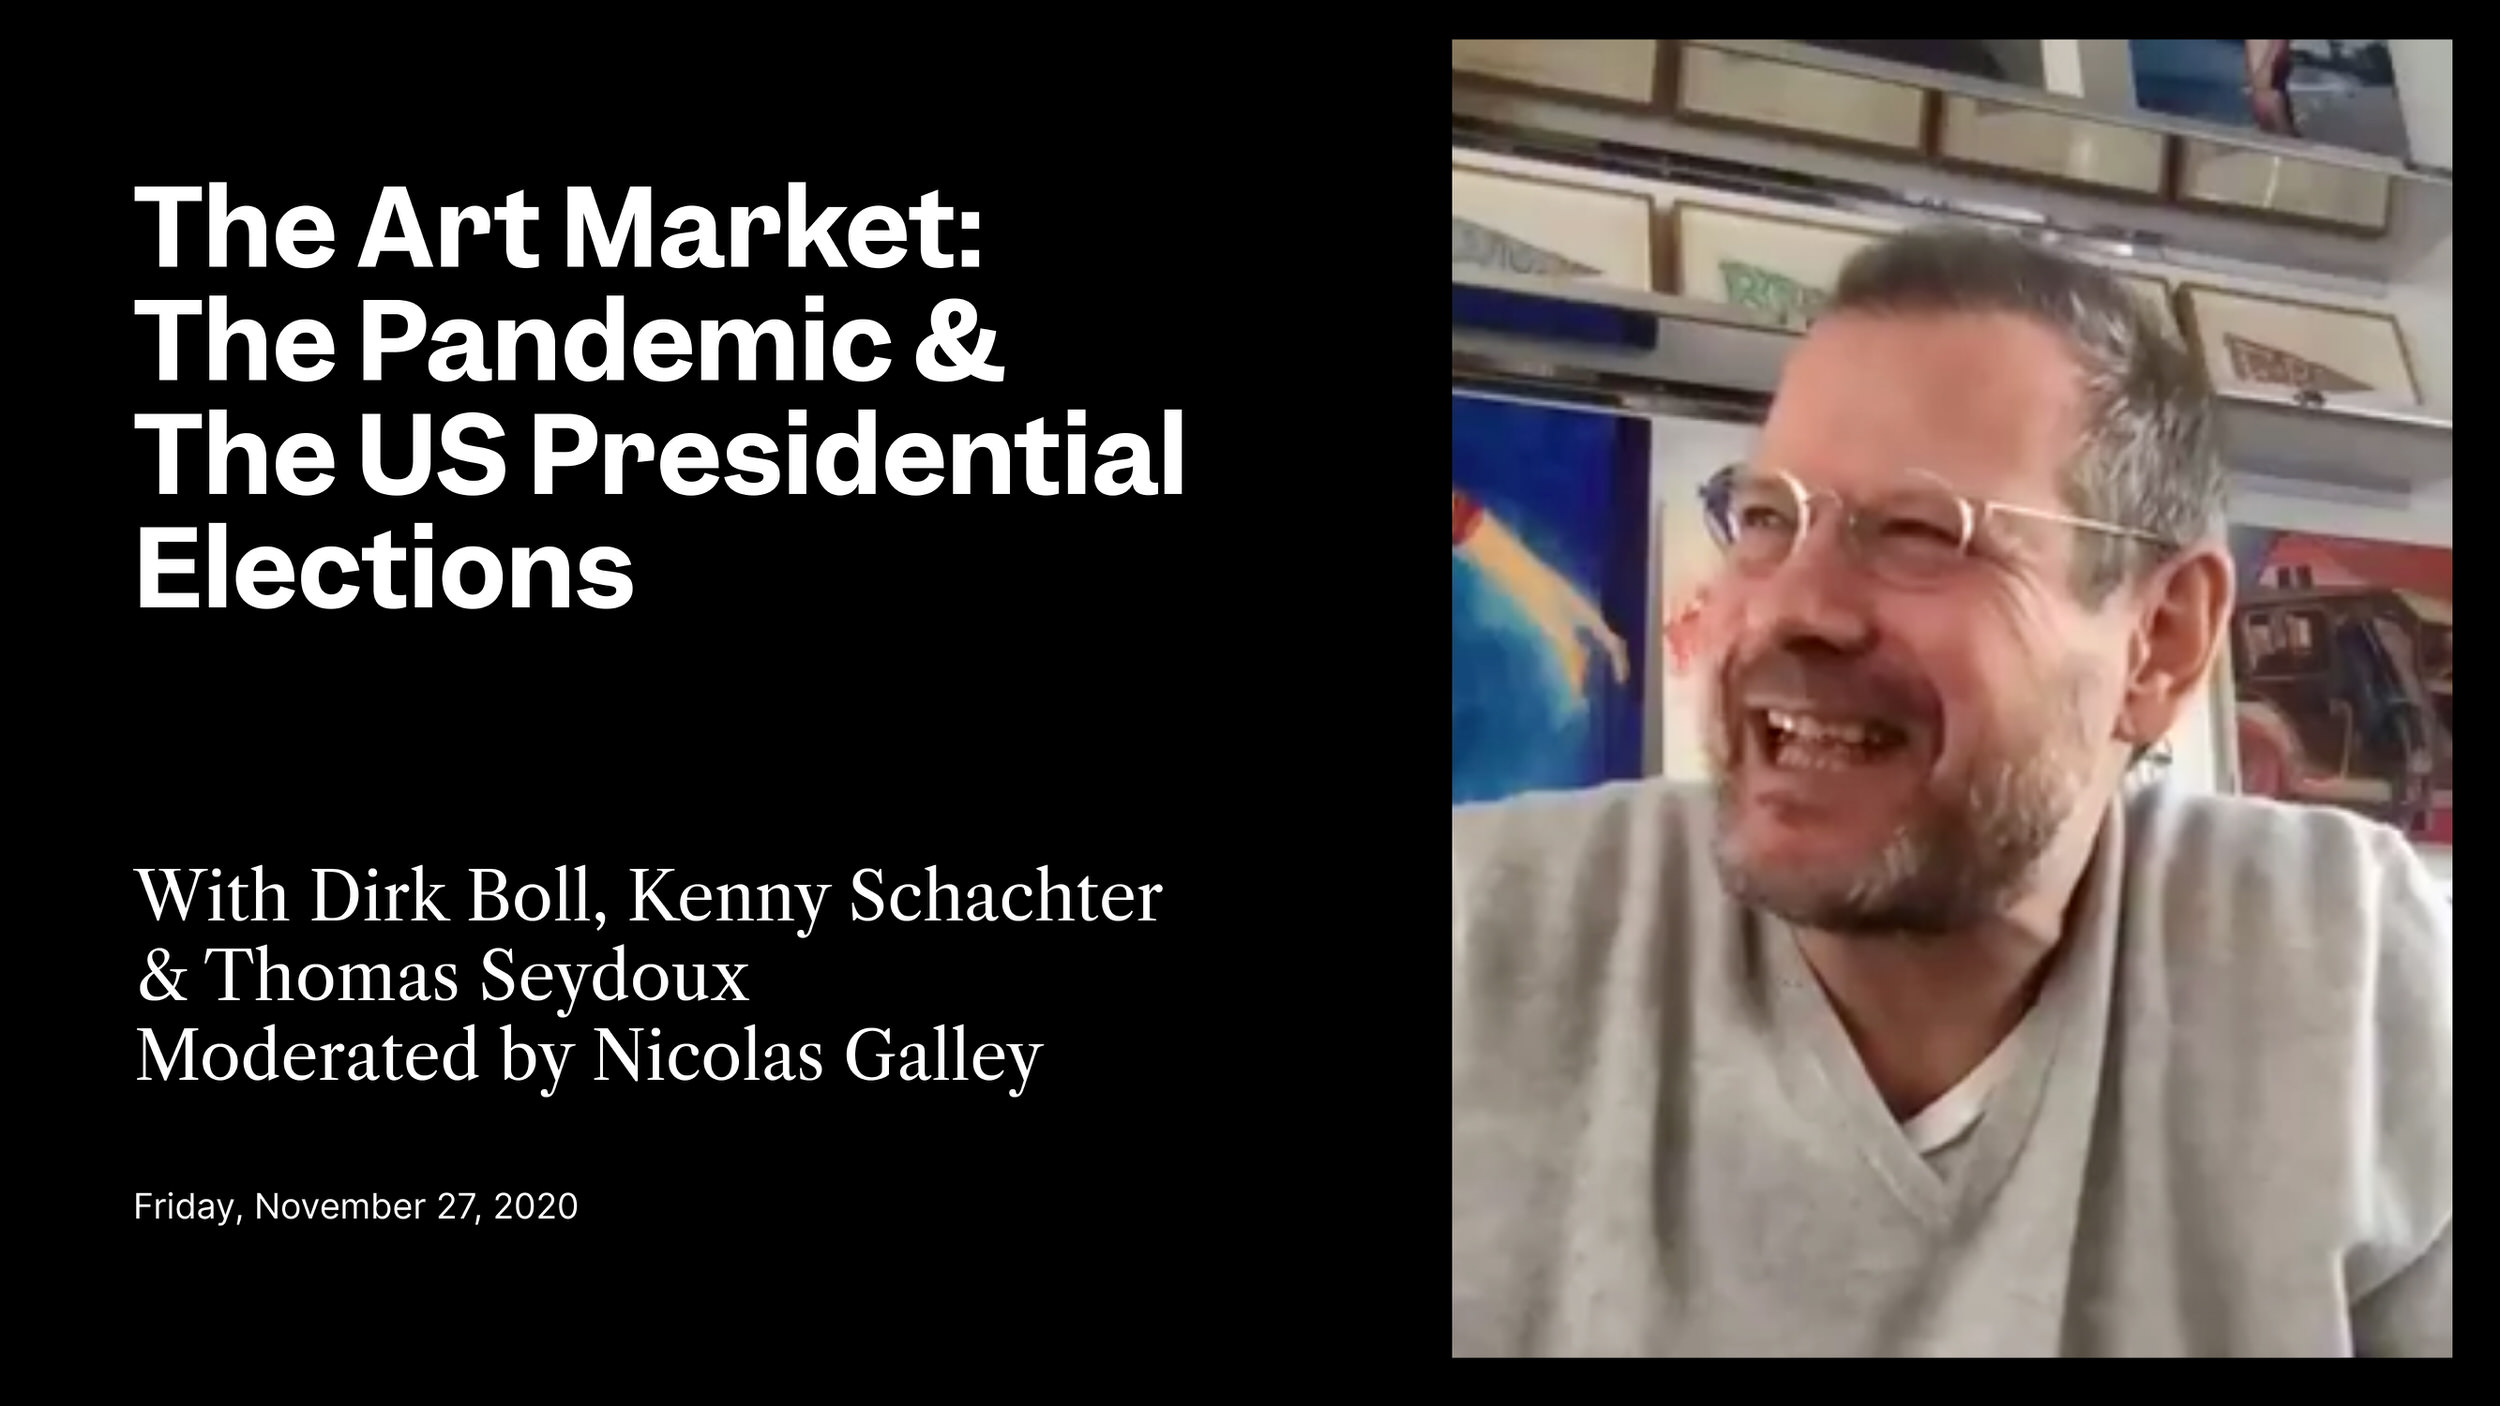 University of Zurich Art Market Studies: The Art Market, The Pandemic & The US Presidential Elections